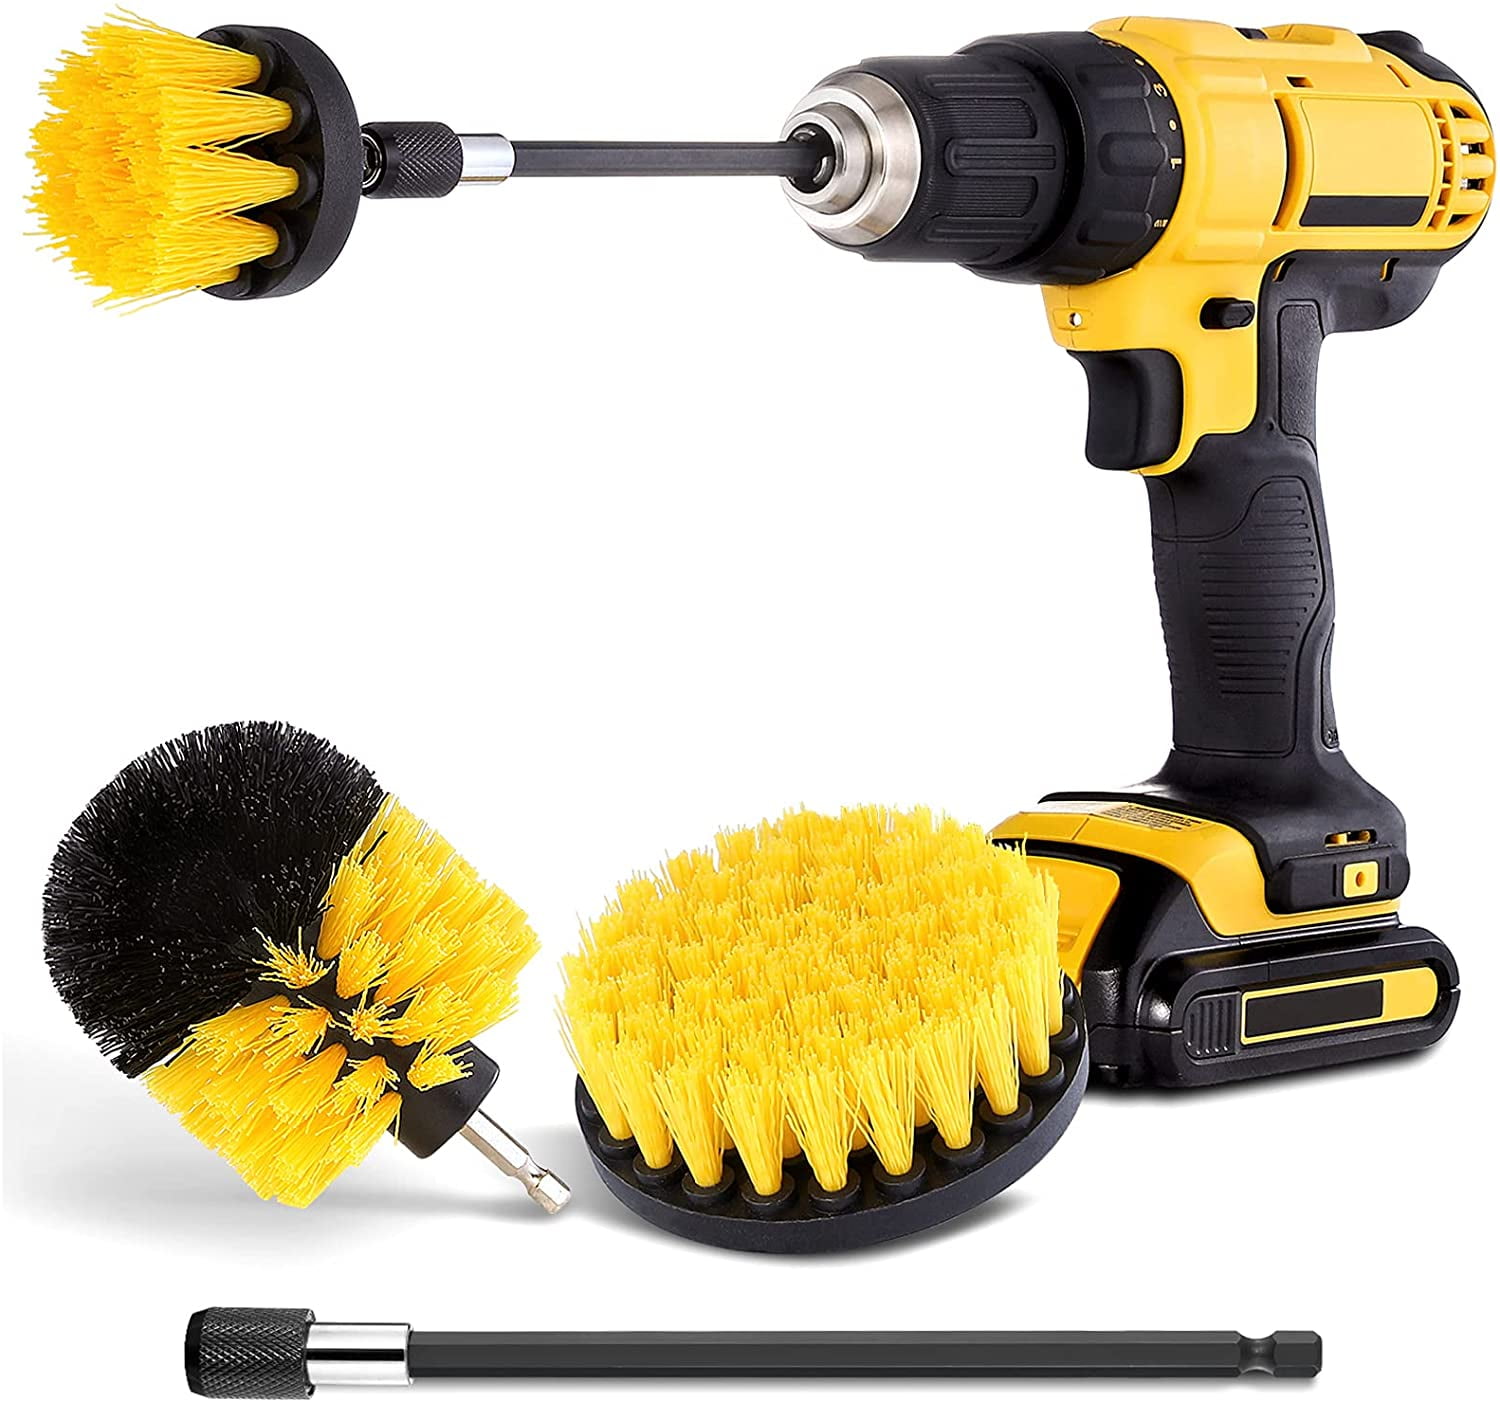 Drill Brush Power Scrubber Set Drill Attachment For Carpet Tile Grout Cleaning 